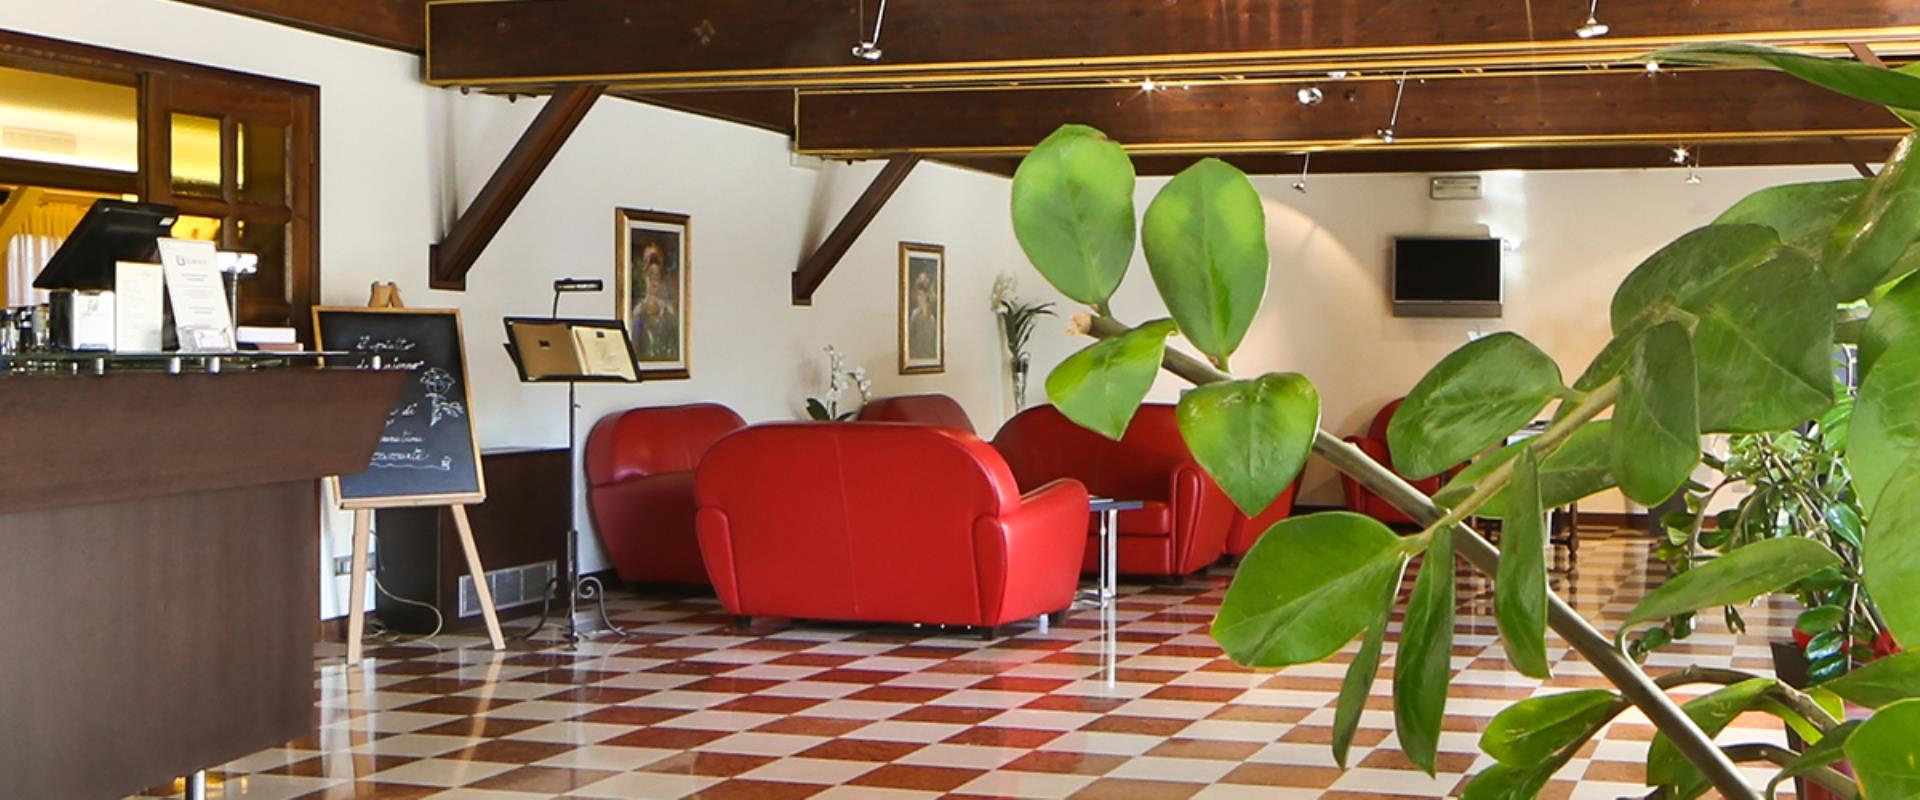  Looking for a hotel for your stay in Silea (TV)? Book/reserve at the Best Western Titian Inn Hotel Treviso